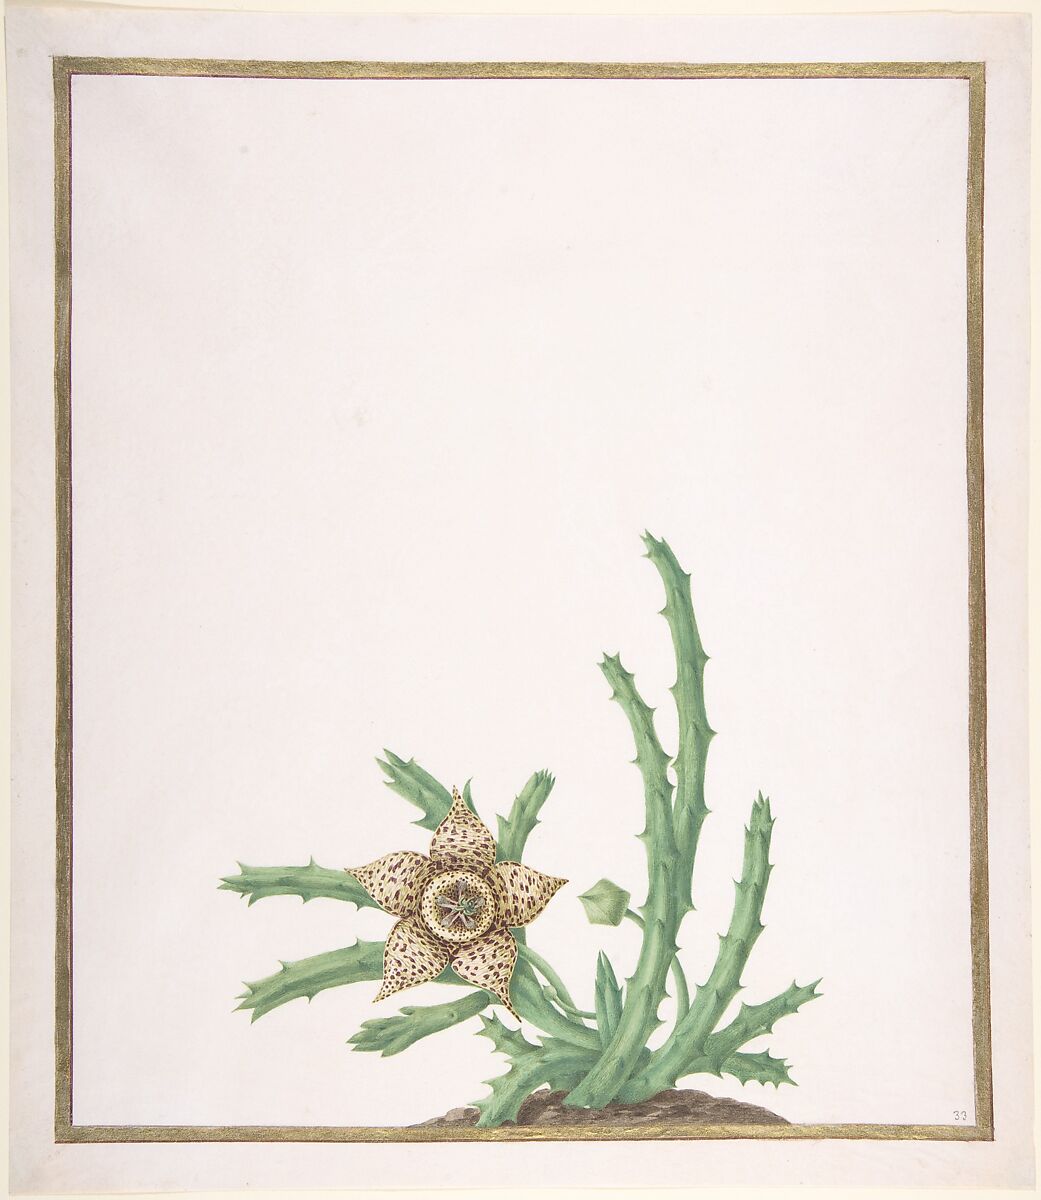 A Stapelia Variegata, Nicolas Robert (French, Langres 1614–1685 Paris), Watercolor and gouache on vellum, border lines in gold 